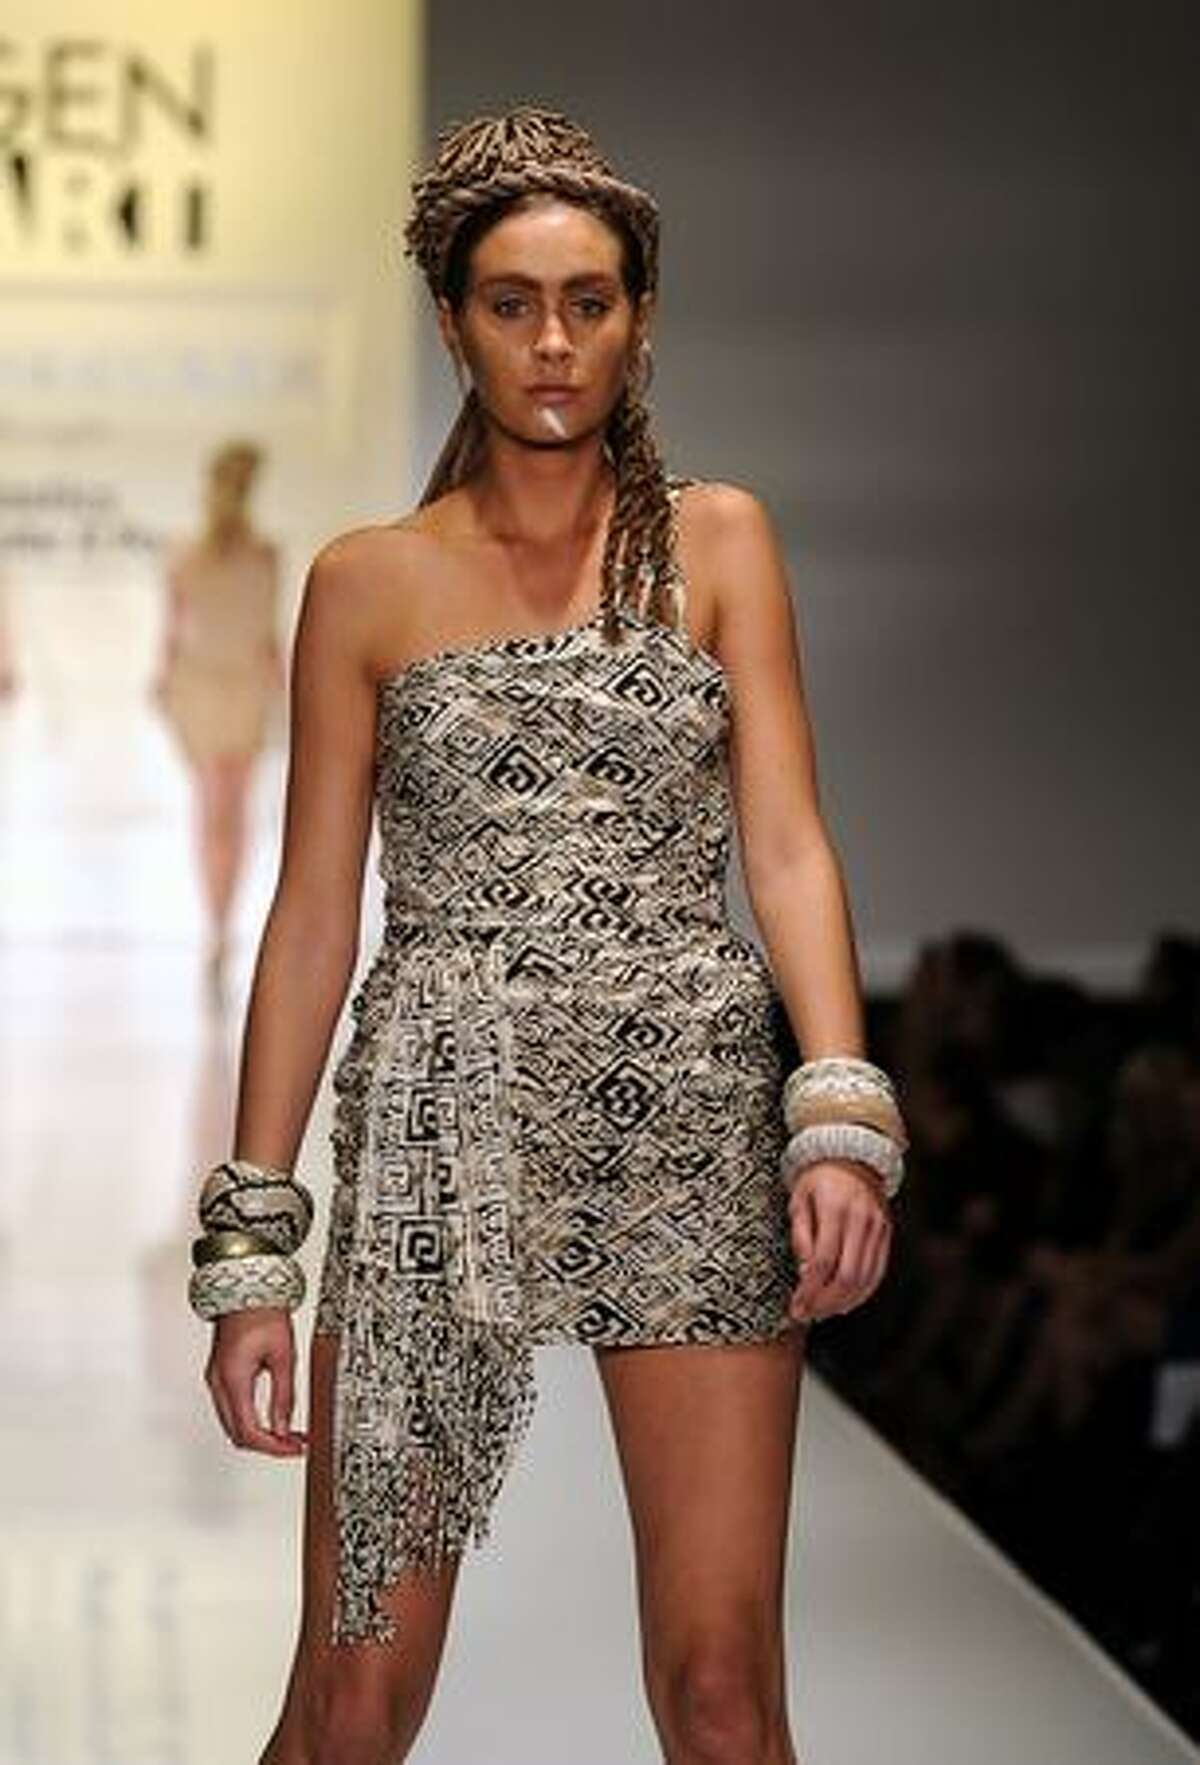 A model wears leyendecker on the runway at Gen Art's 12th Annual "Fresh Faces In Fashion" at the Petersen Automotive Museum in Los Angeles, California.